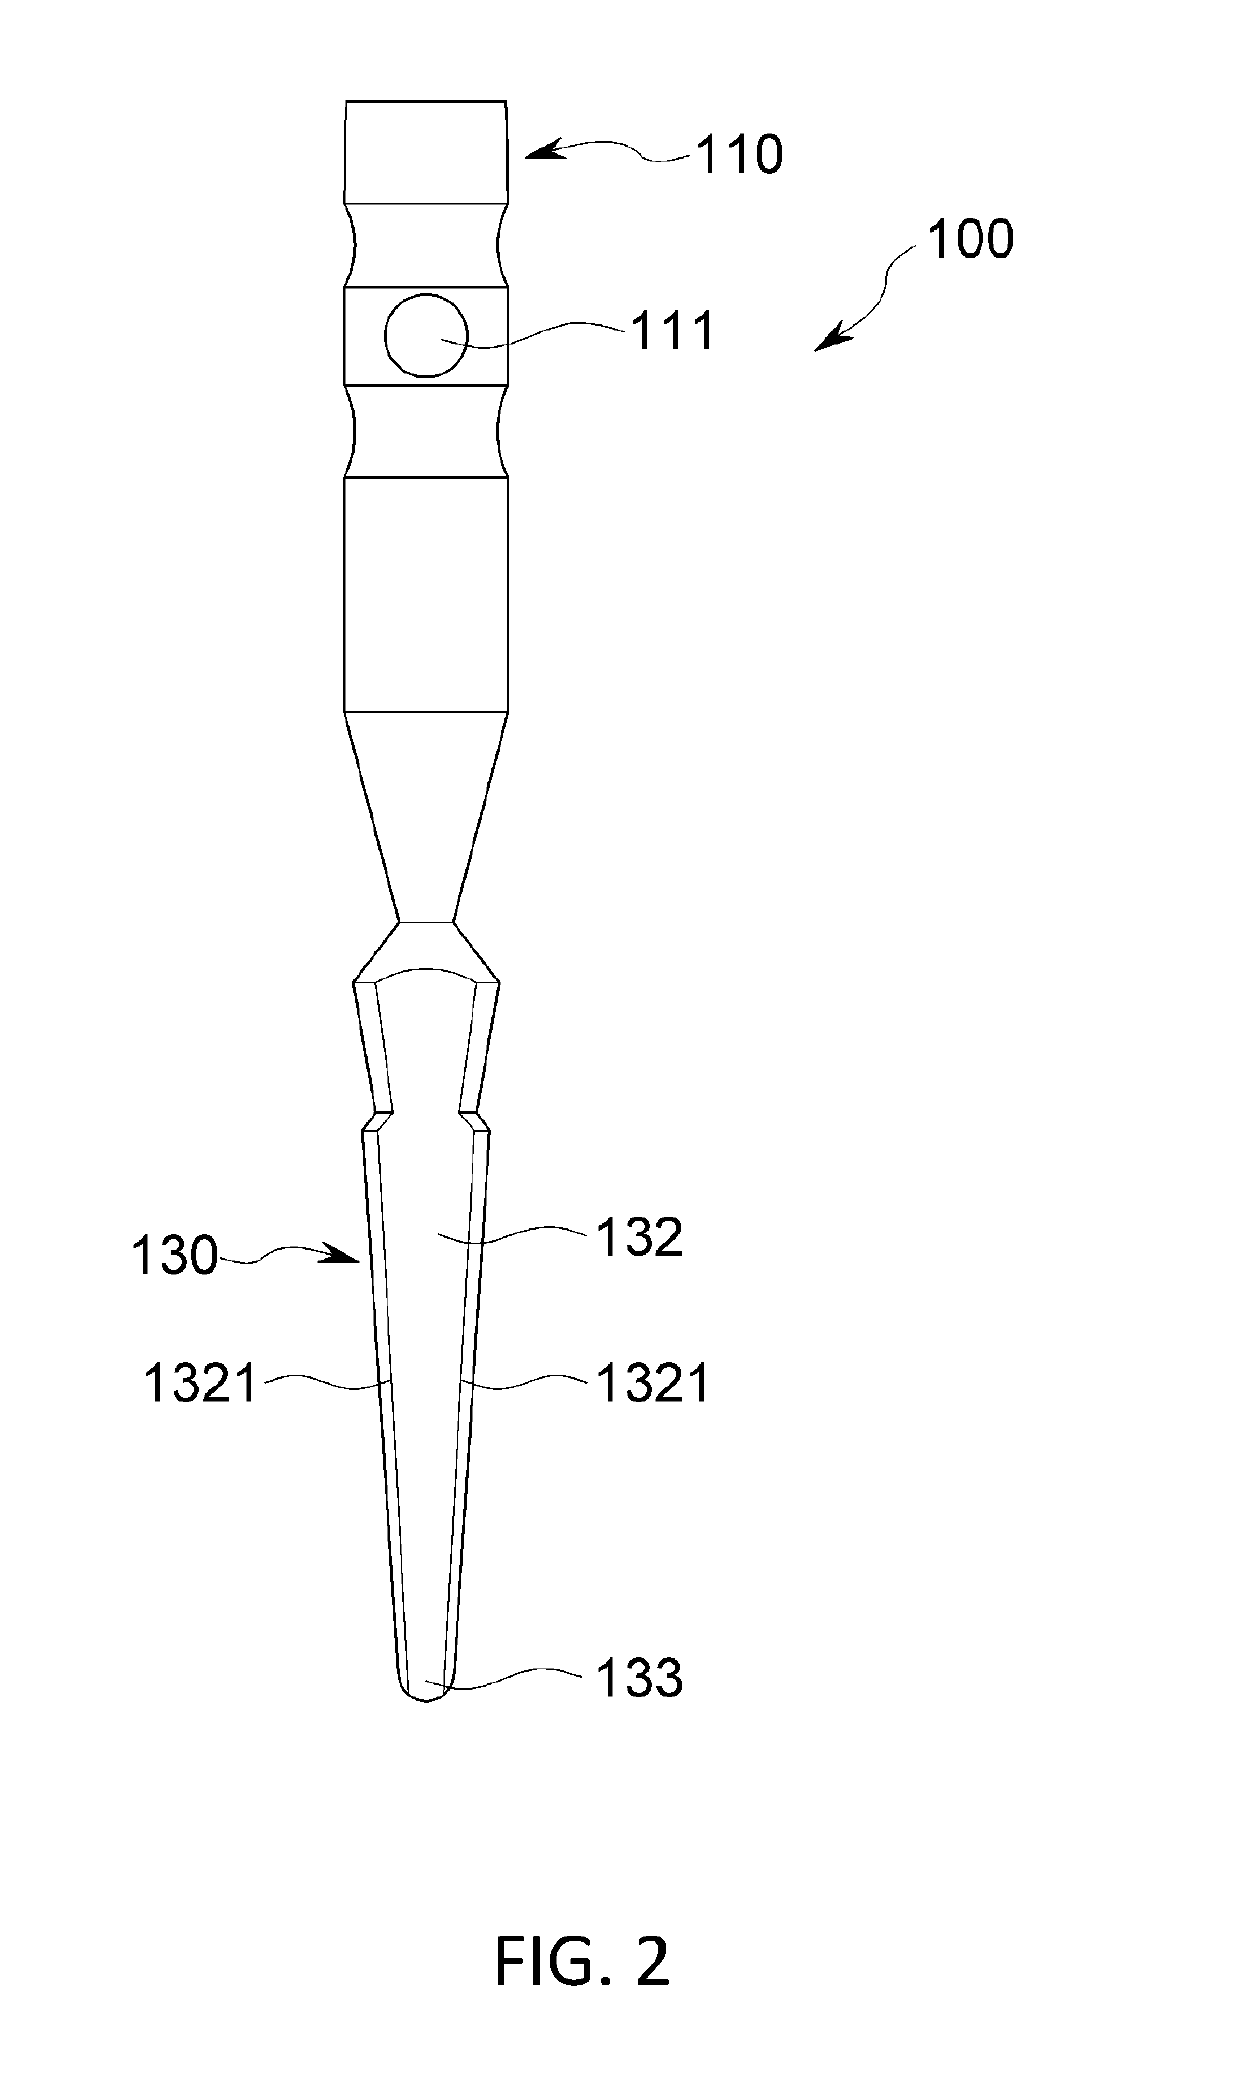 Non-incisional dental implant surgical method using guide pin